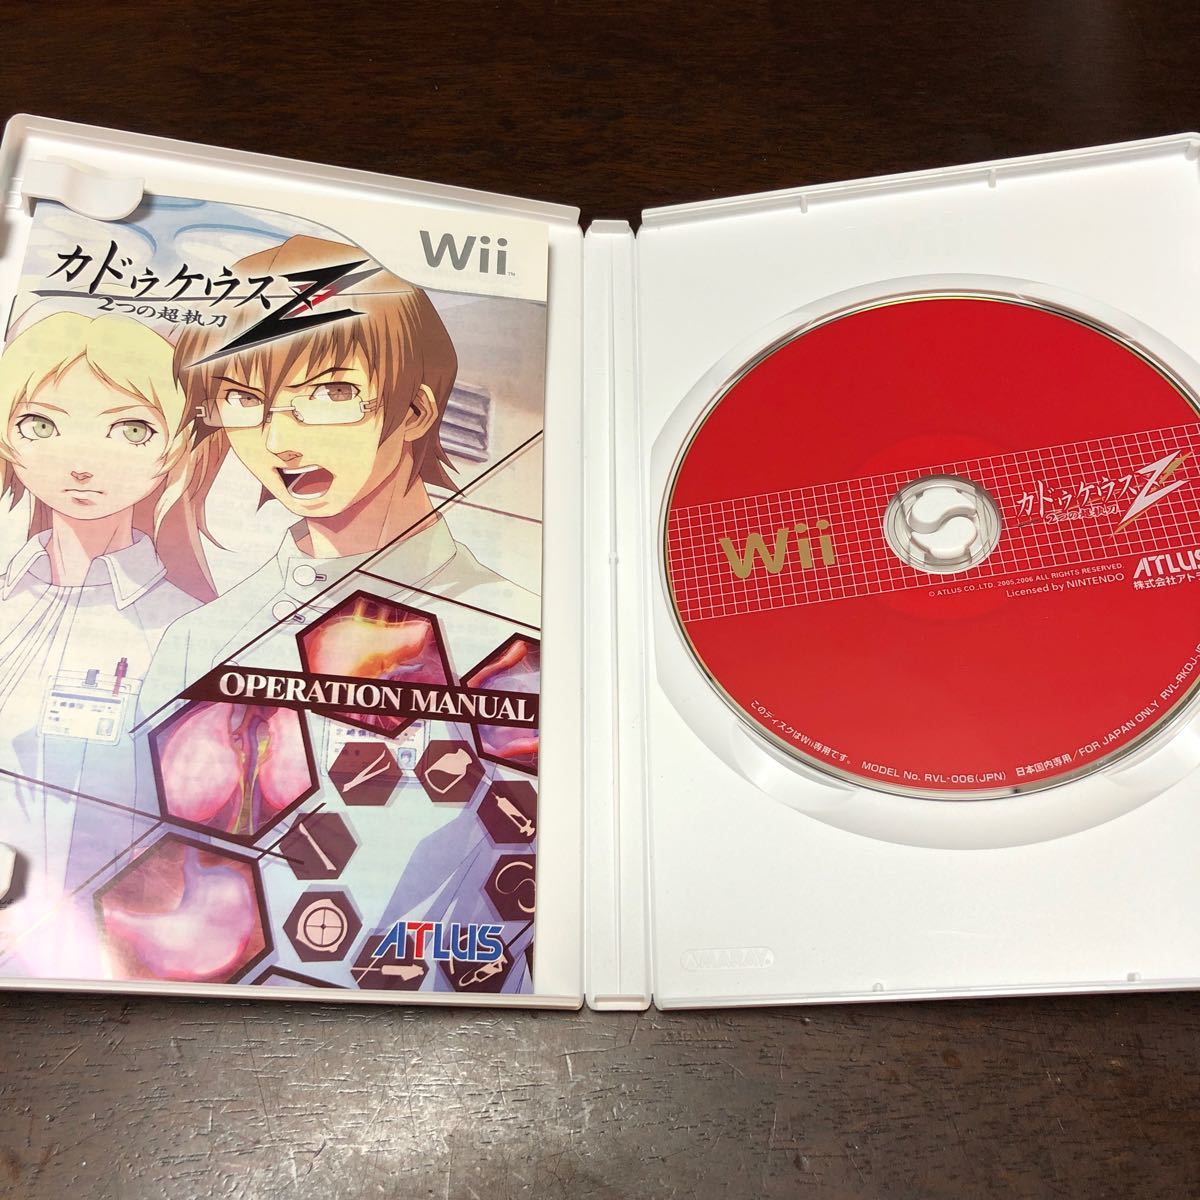 【Wii】 みんなのリズム天国　他7作品